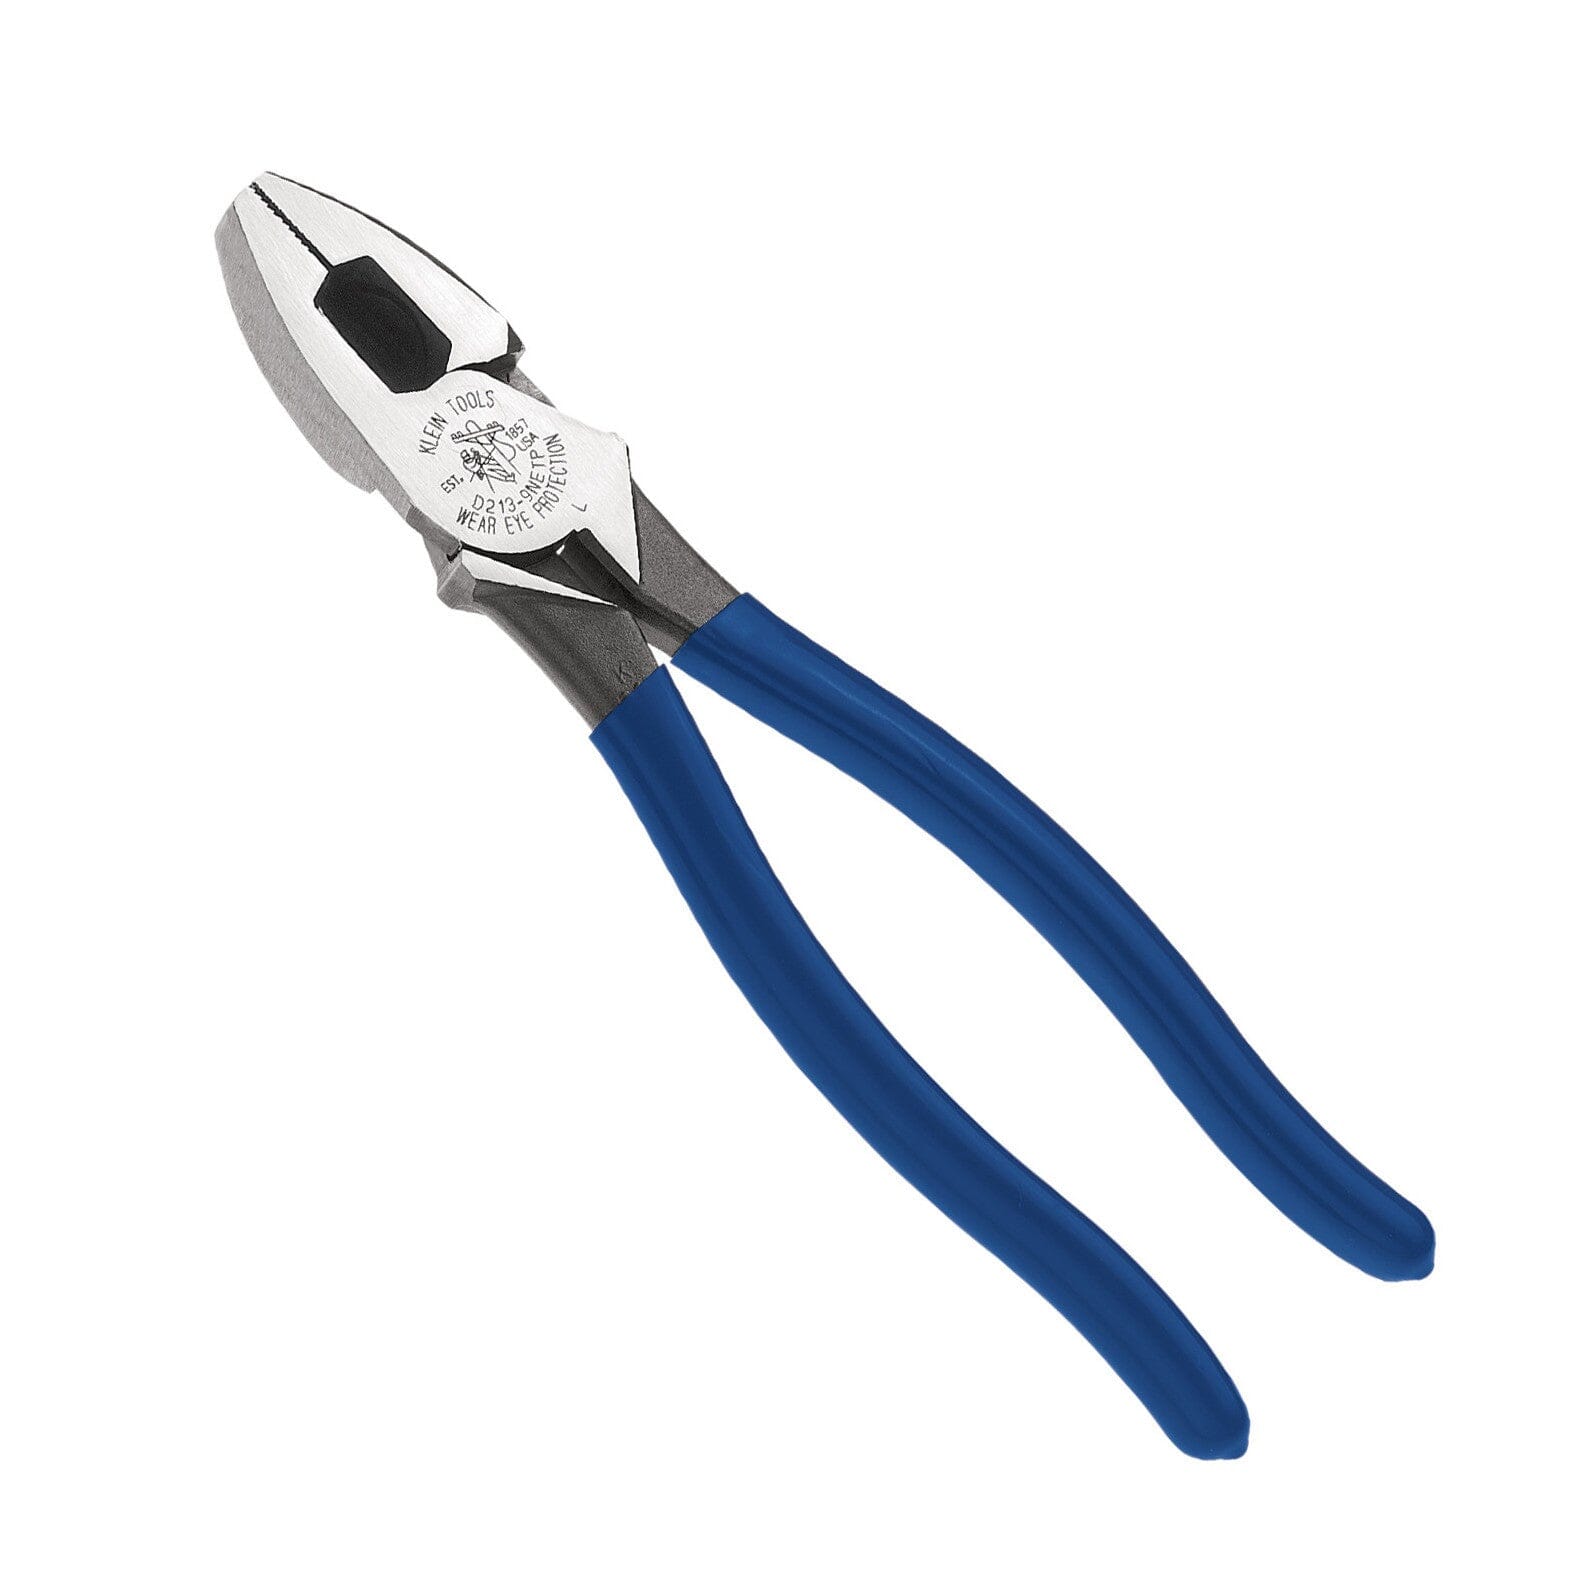 Klein 9'' High-Leverage Side-Cutting Pliers - Fish Tape Pulling - D213-9NETP Pliers Klein Tools 